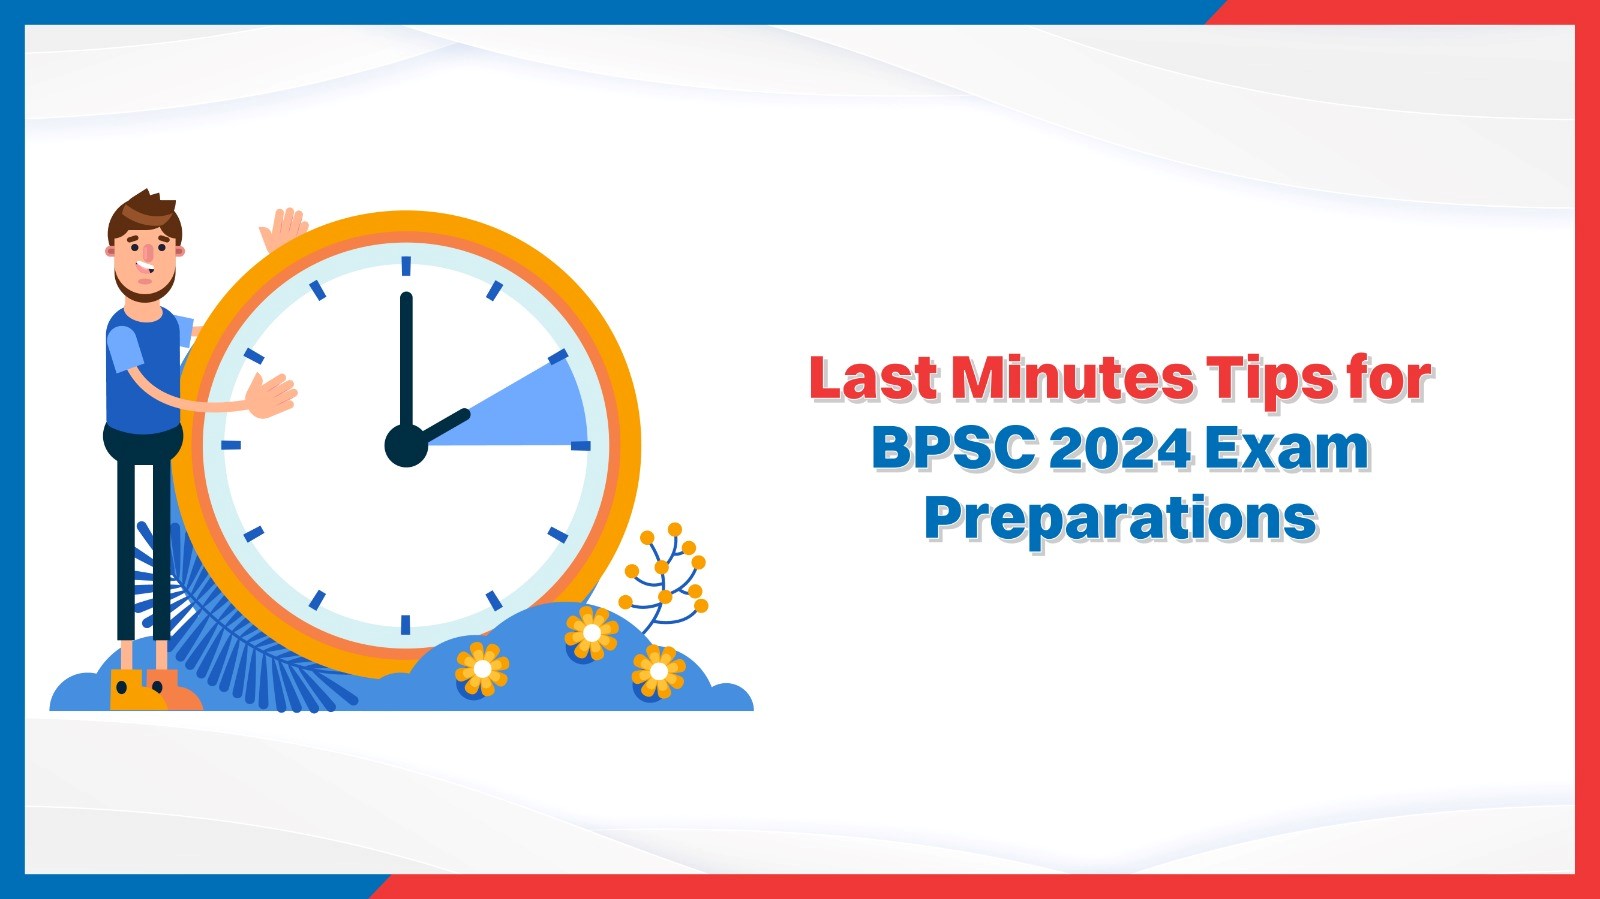 Last Minutes Tips for BPSC 2024 Exam Preparations  